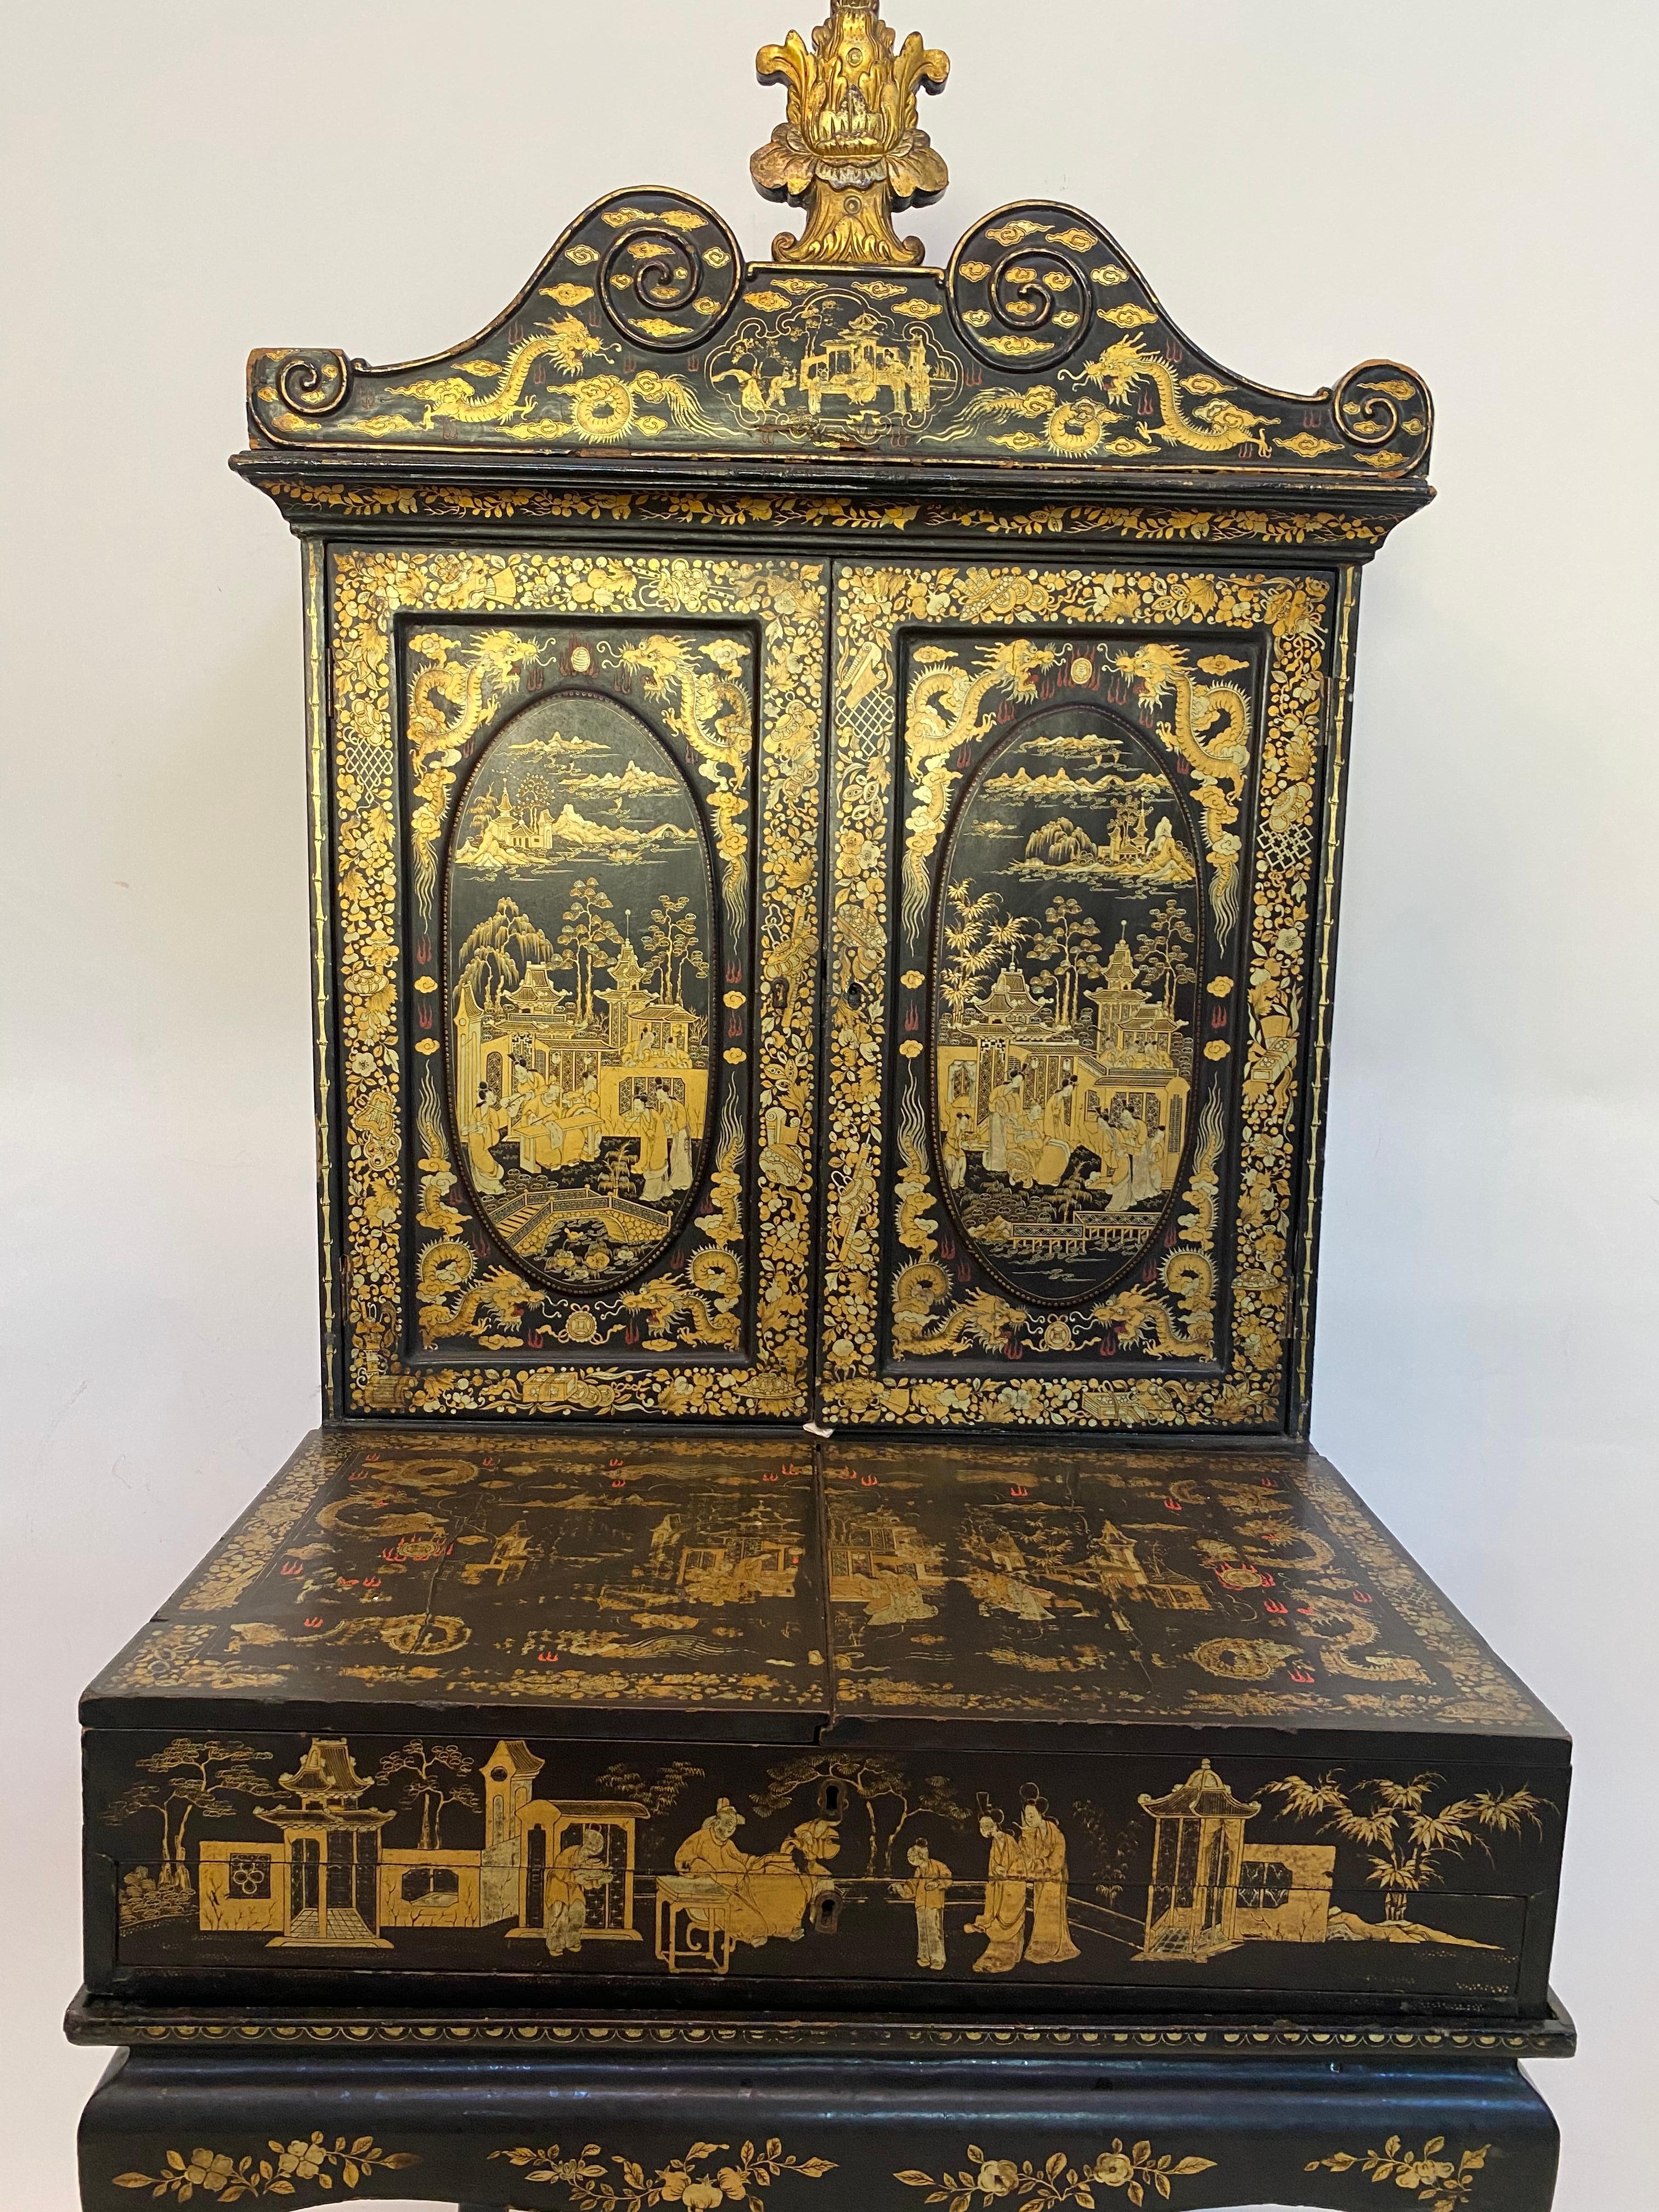 A 18th century Chinese export lacquered George III style black and gilt ladies dressing chest, in the form of a chinoiserie secretaire, the top with swan neck pediment above twin cupboard doors, each decorated with vignettes of courtly figures in